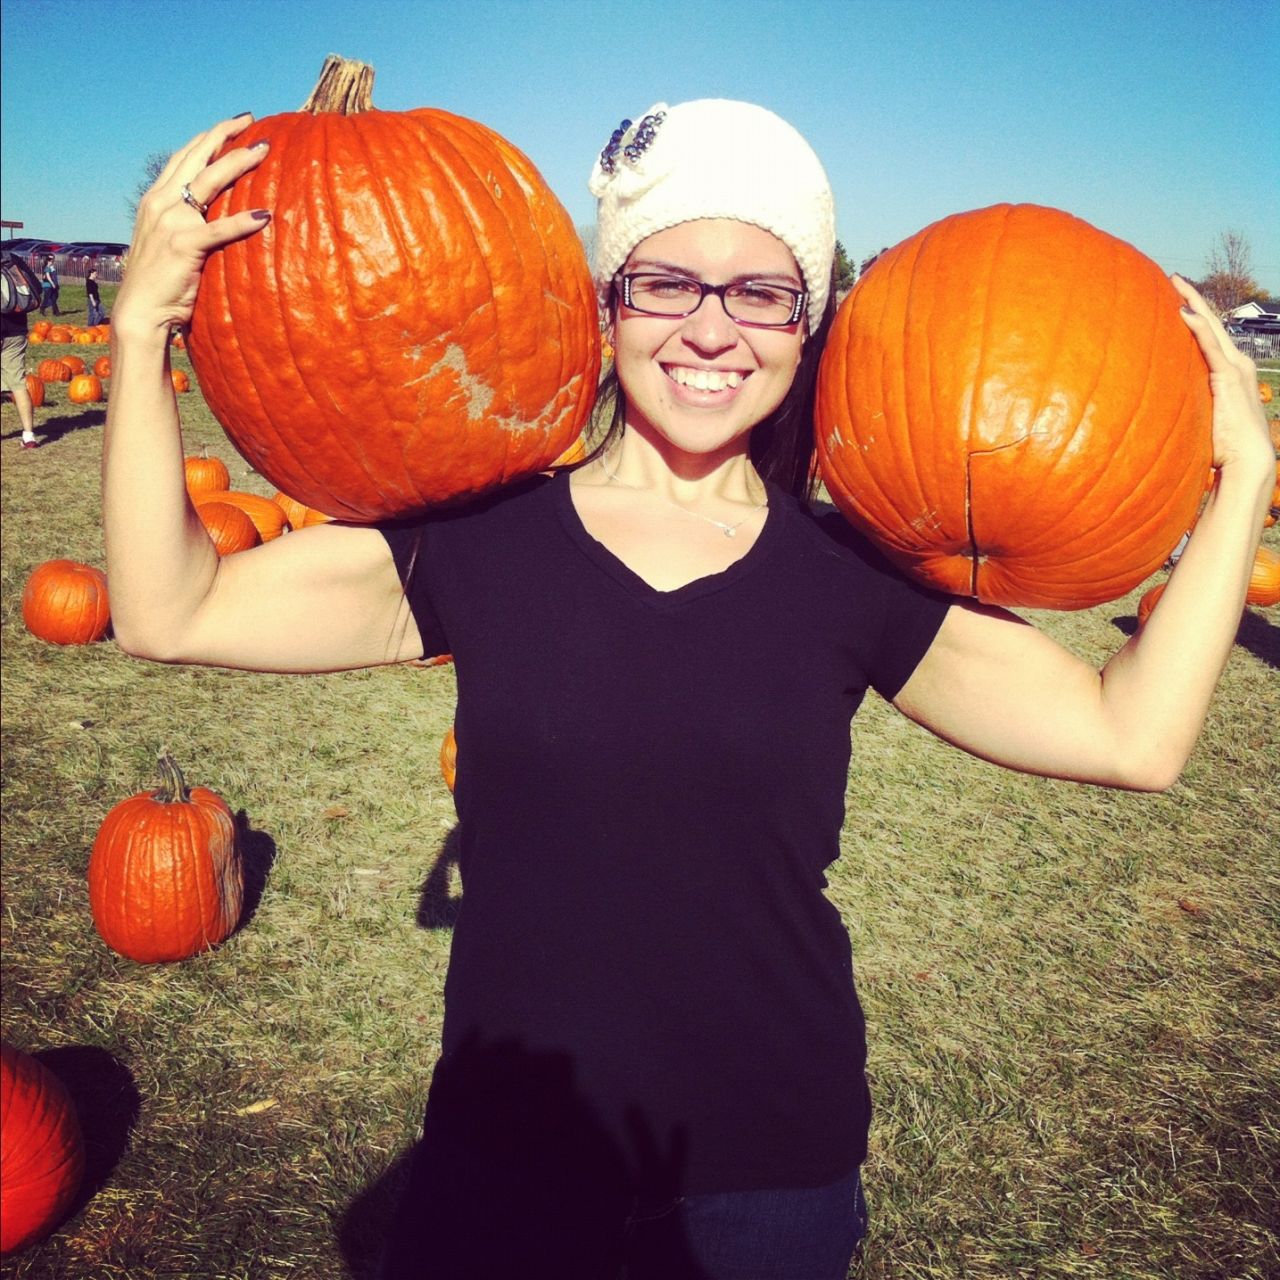 Today Garcia weighs 128 pounds. On the couple's annual trip to the pumpkin patch in October 2012, Garcia carried pumpkins to make up for missing a workout at the gym.